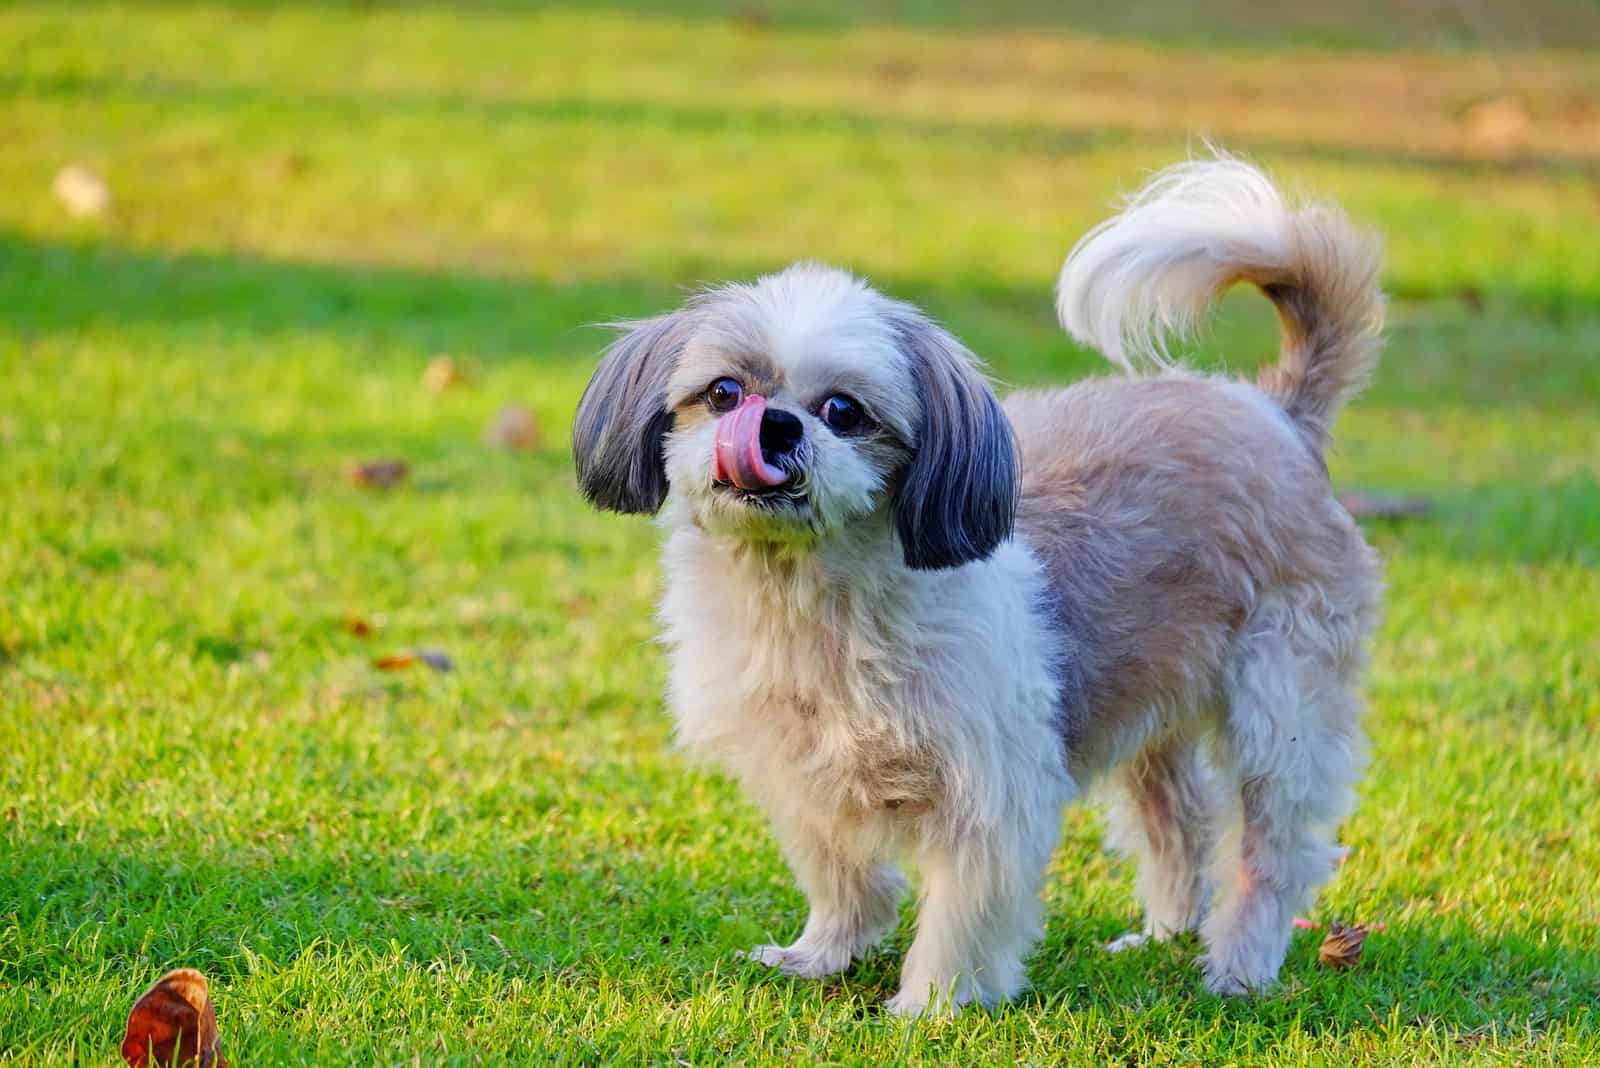 the adorable Shih Tzus stands in the meadow